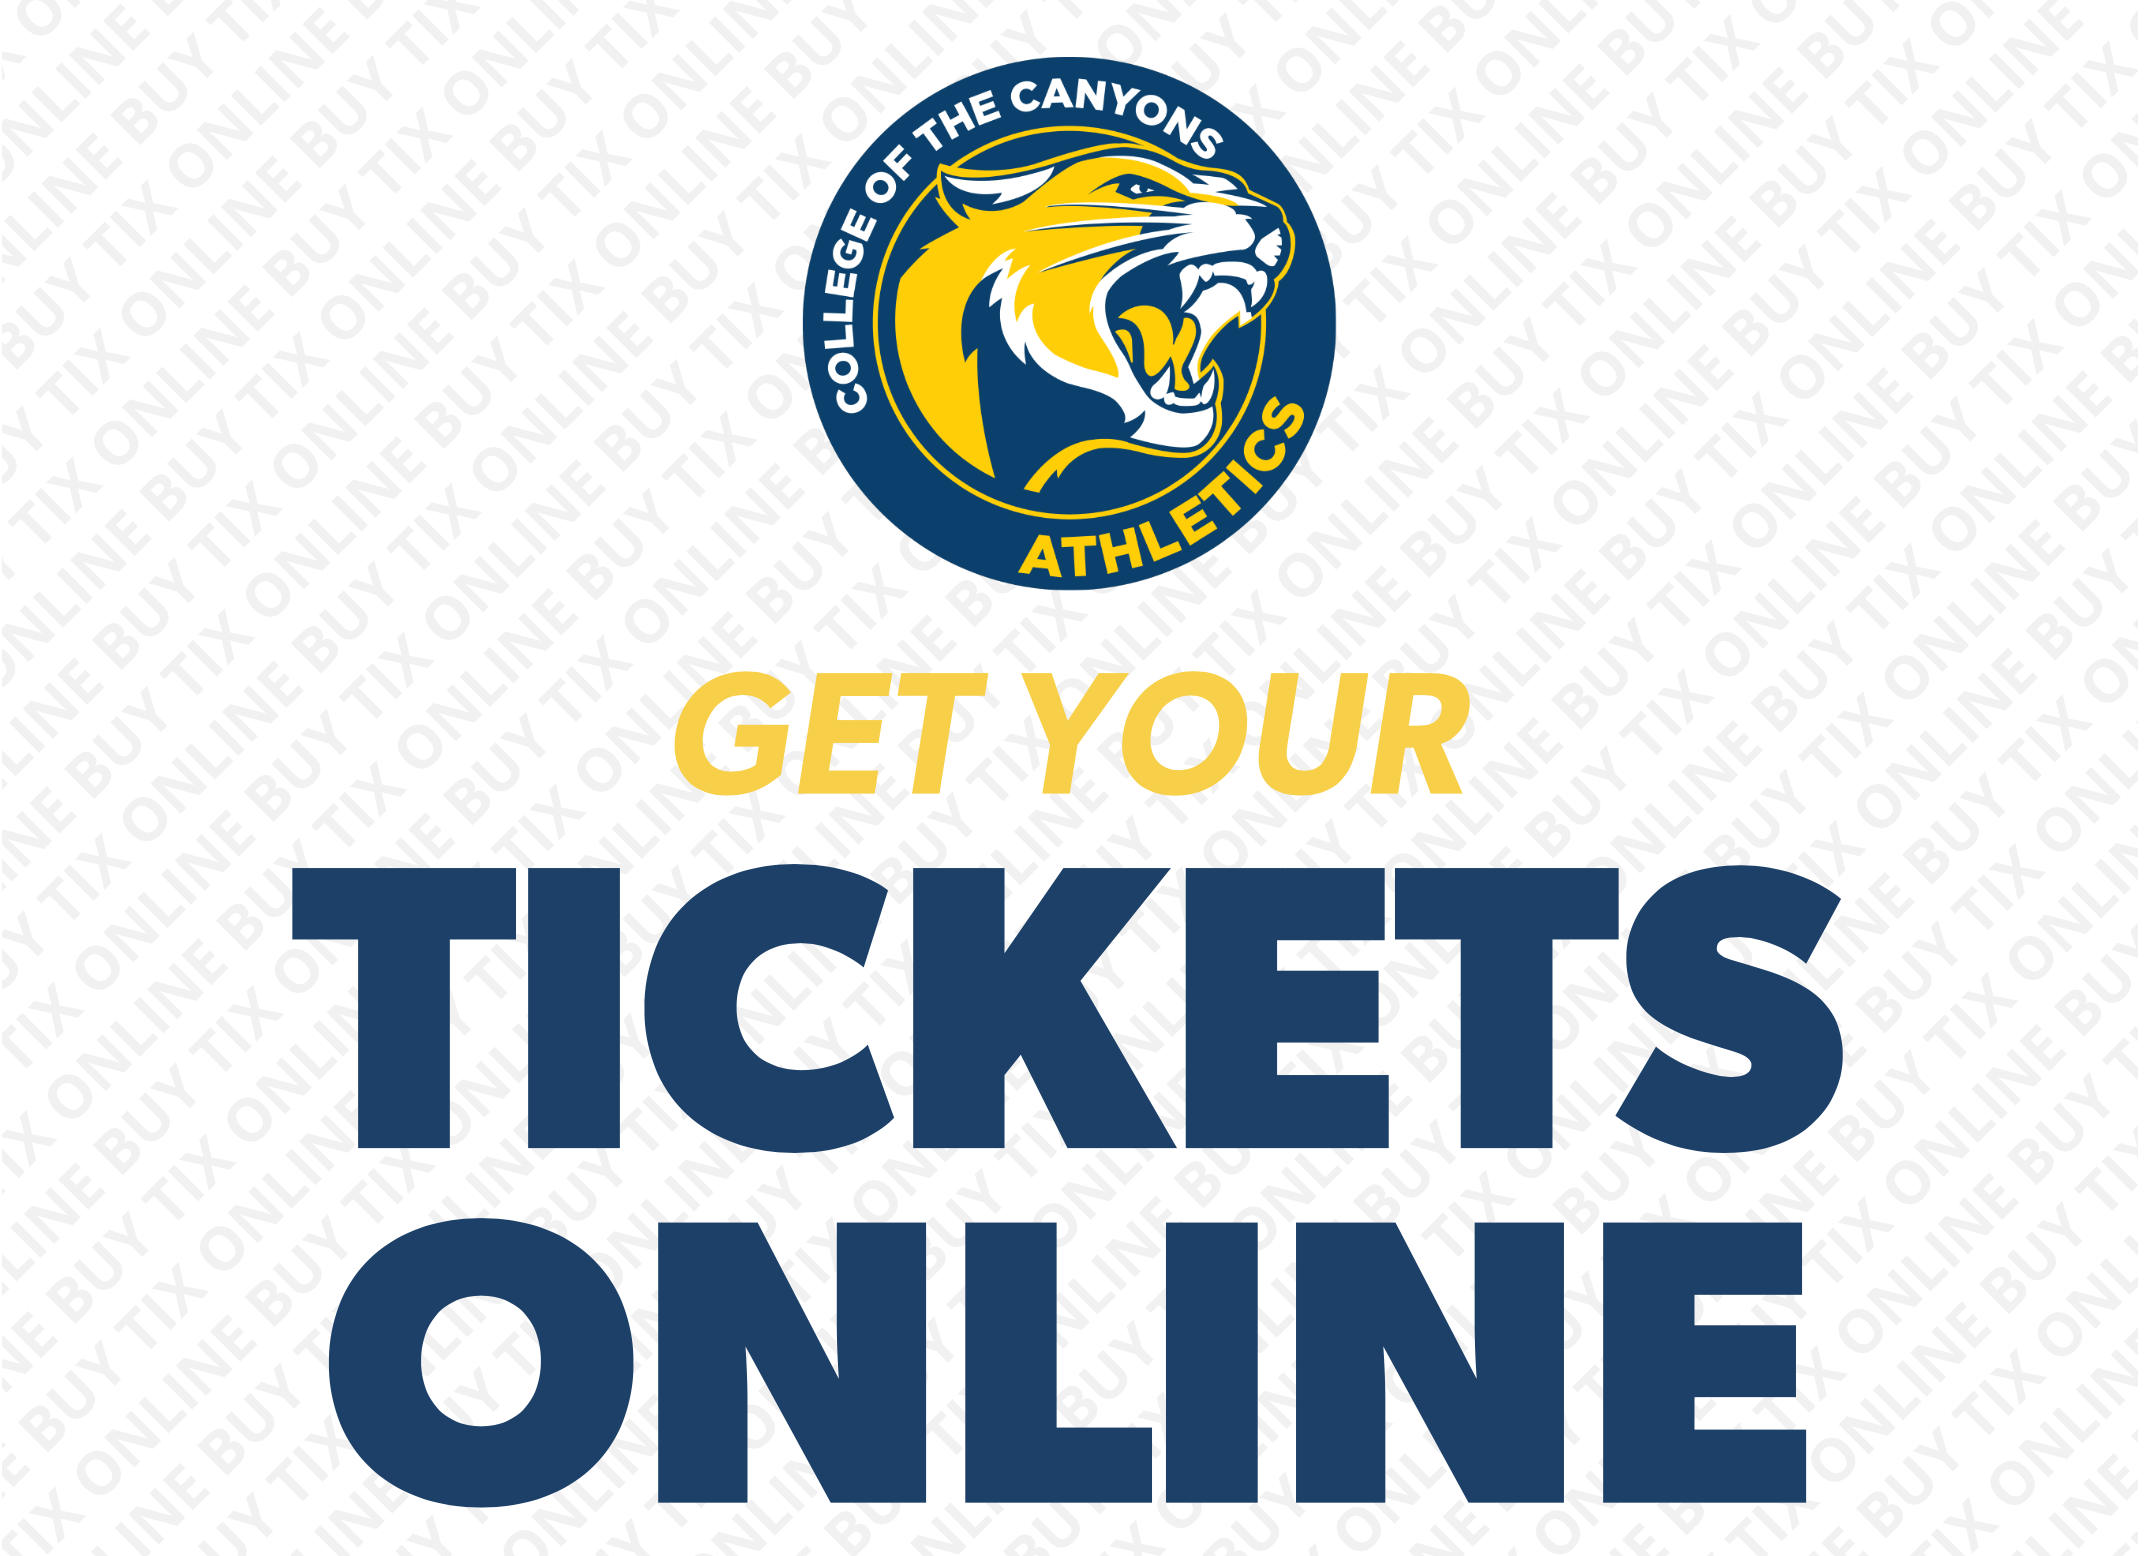 College of the Canyons athletics get your tickets logo graphic.